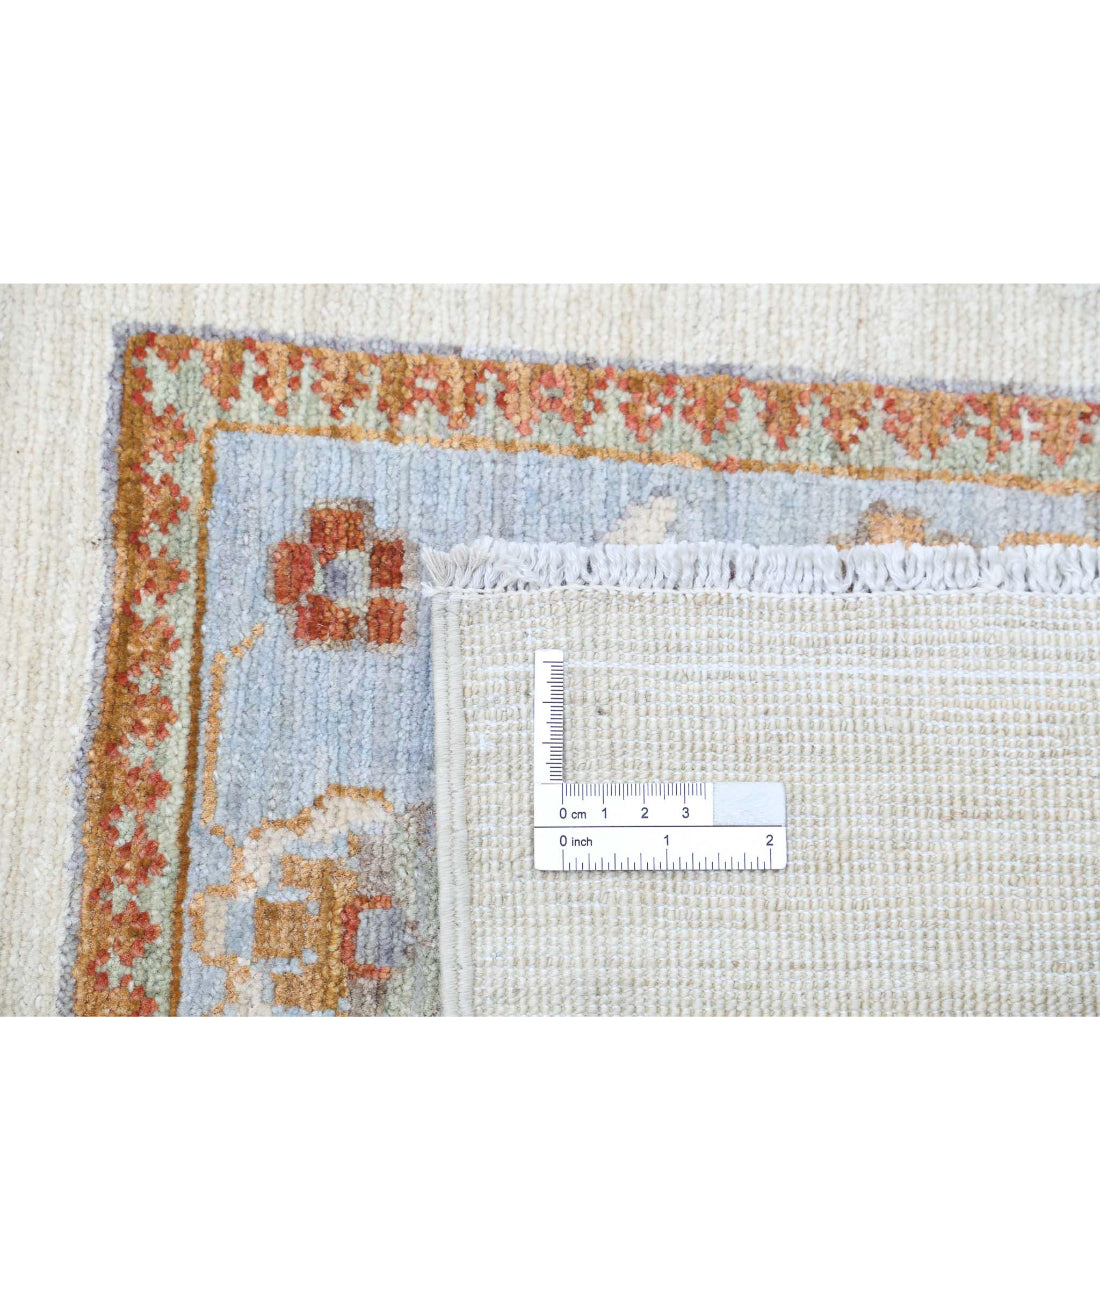 Hand Knotted Serenity Wool Rug - 8'1'' x 11'10'' 8'1'' x 11'10'' (243 X 355) / Ivory / Grey